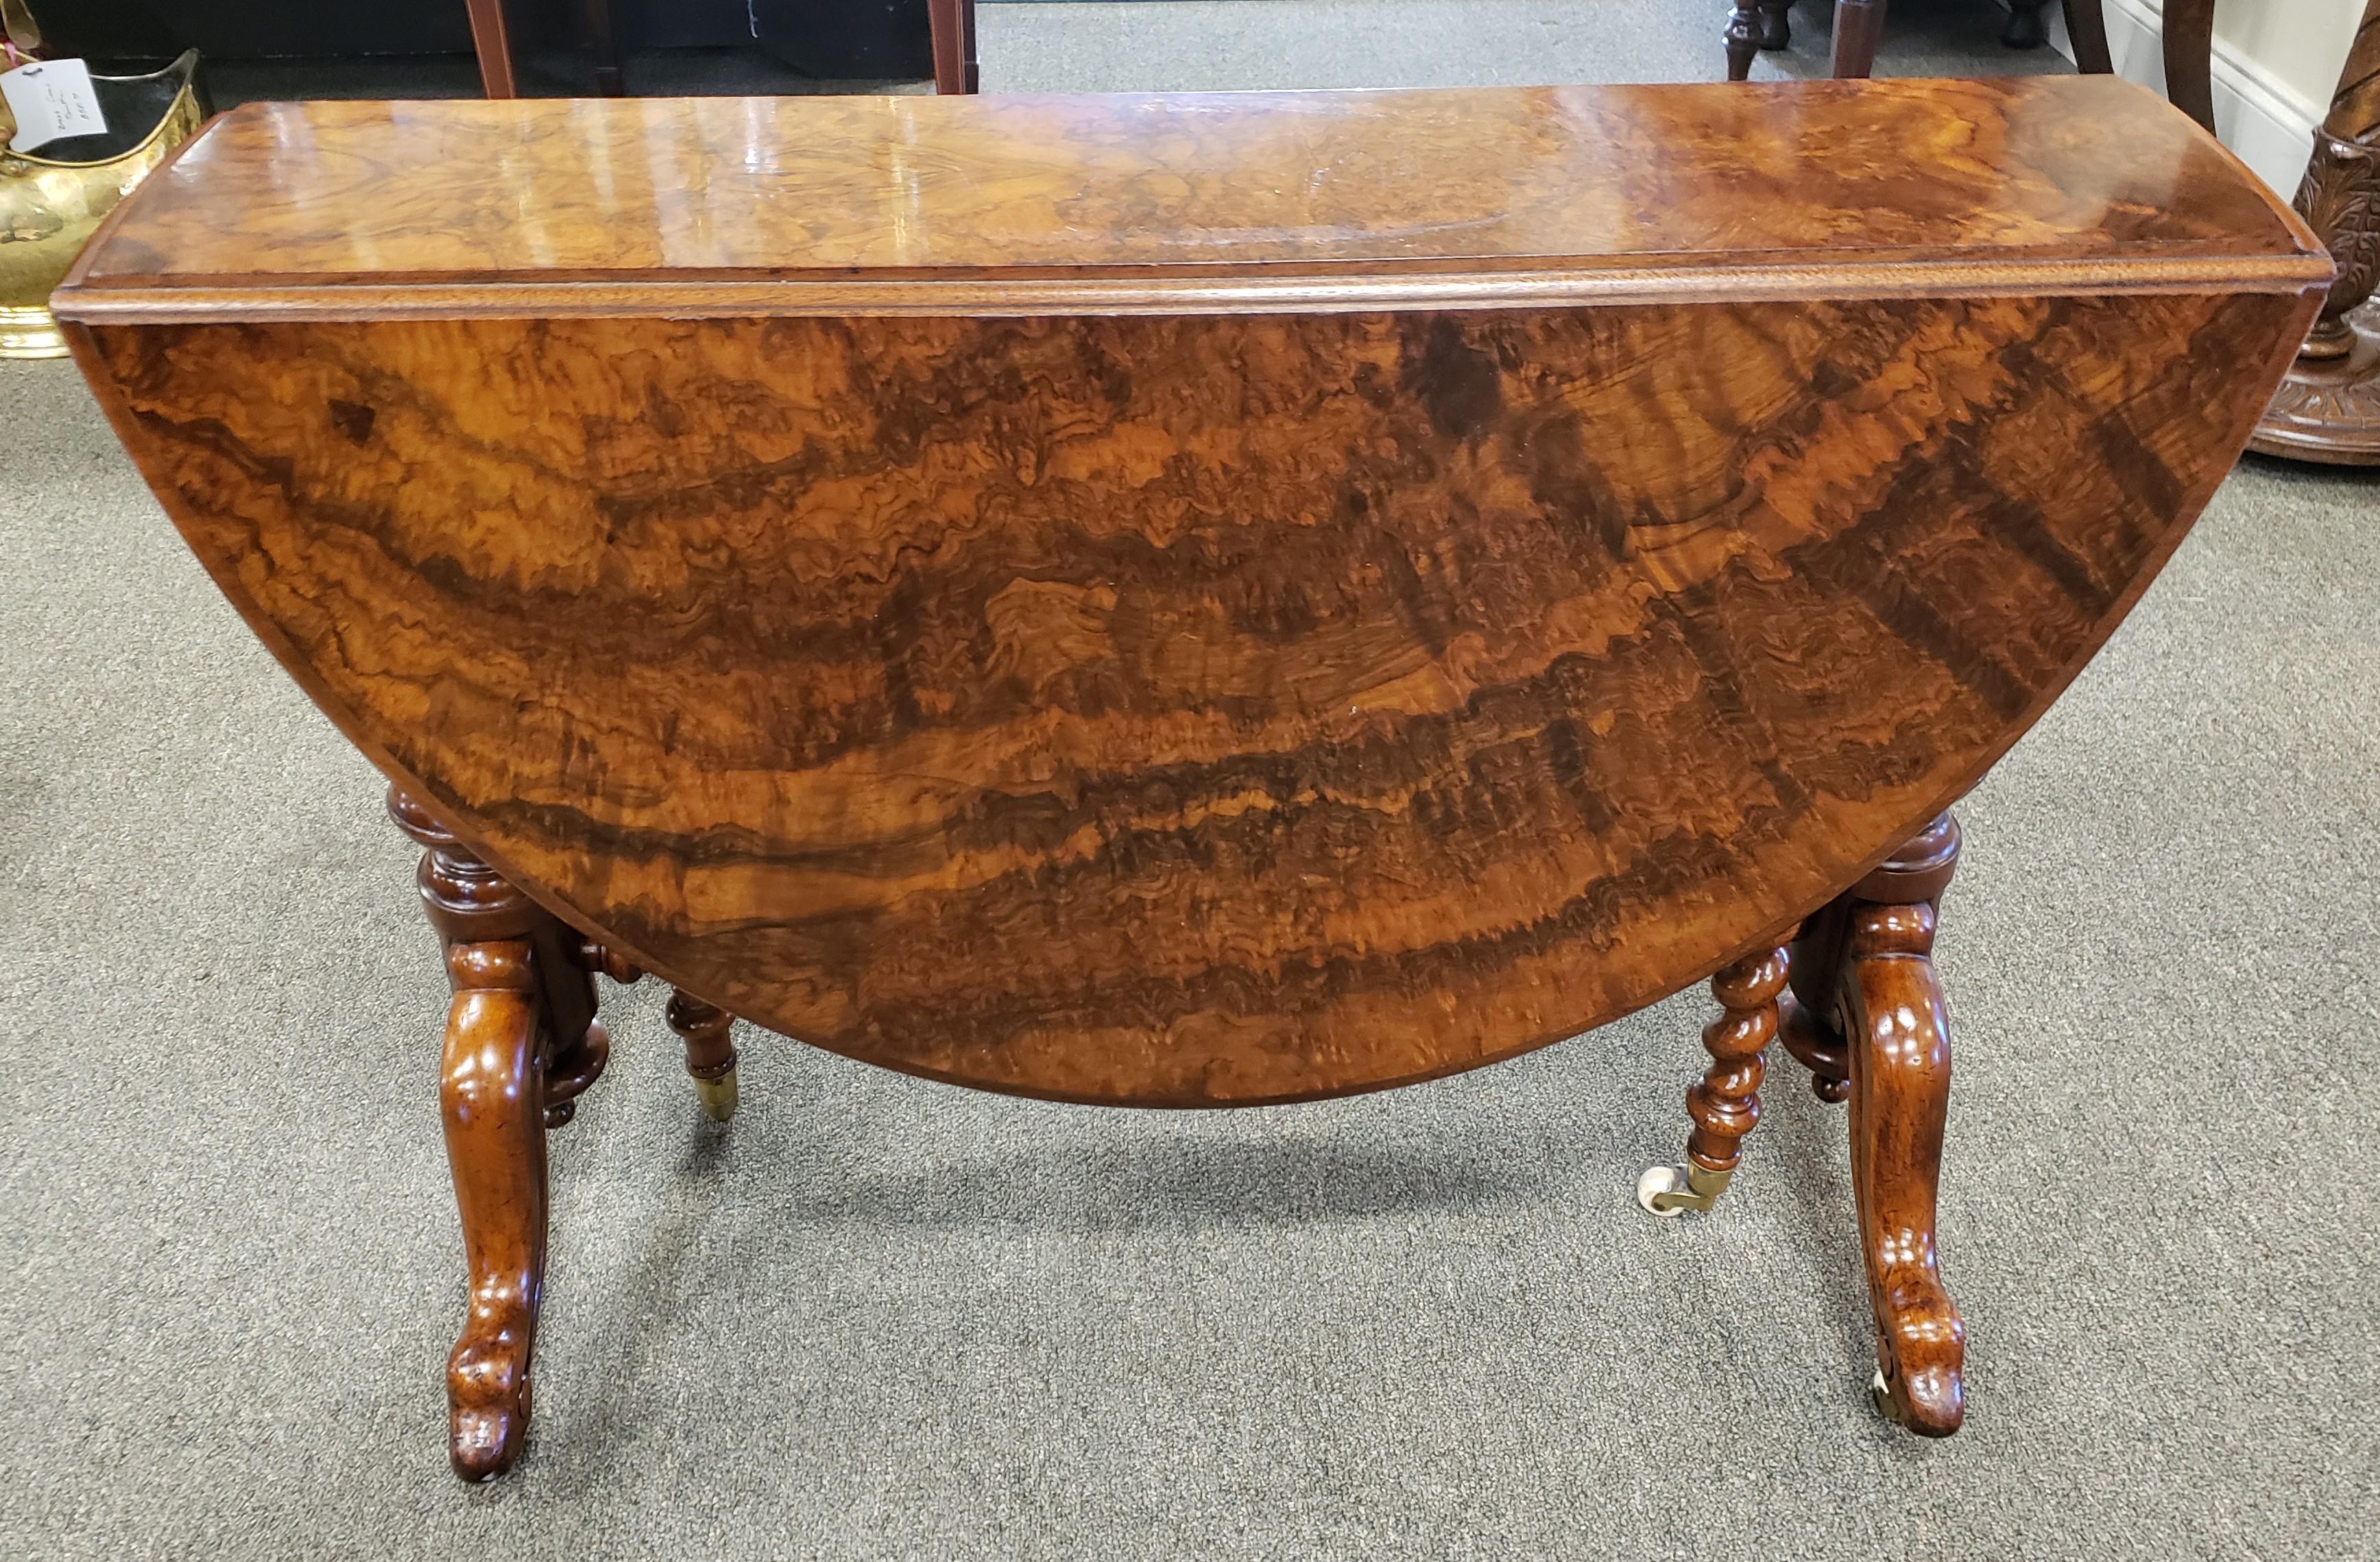 Fine Victorian burl walnut Sutherland table. Barley twist legs and stretcher. Castors on the bottom of the legs. The dimensions given are with the table open. The dimensions of the table closed are 8.5